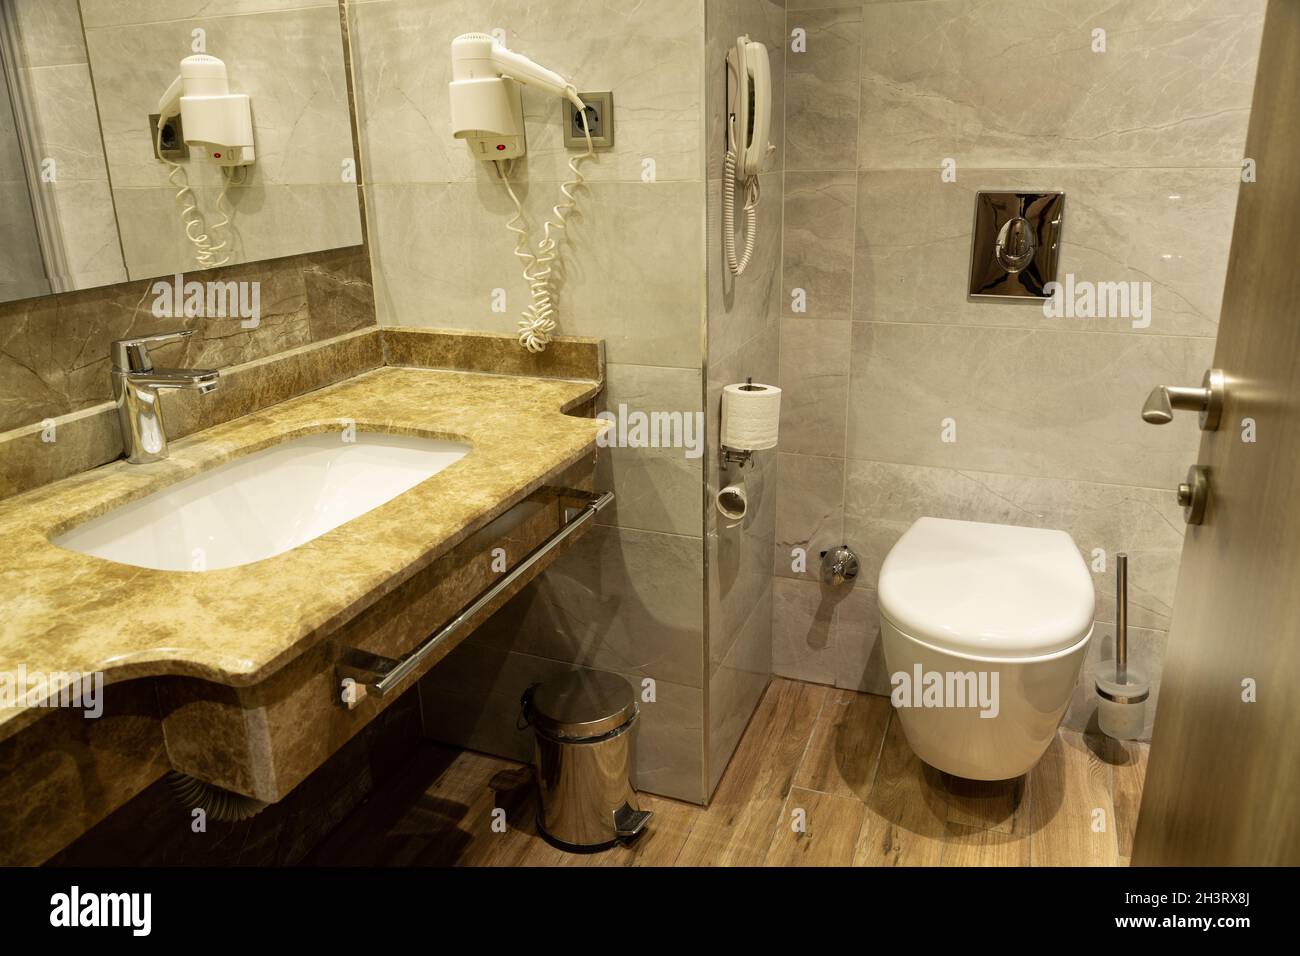 Modern decorated bathroom. It is furnished with natural stone patterned tiles. Stock Photo